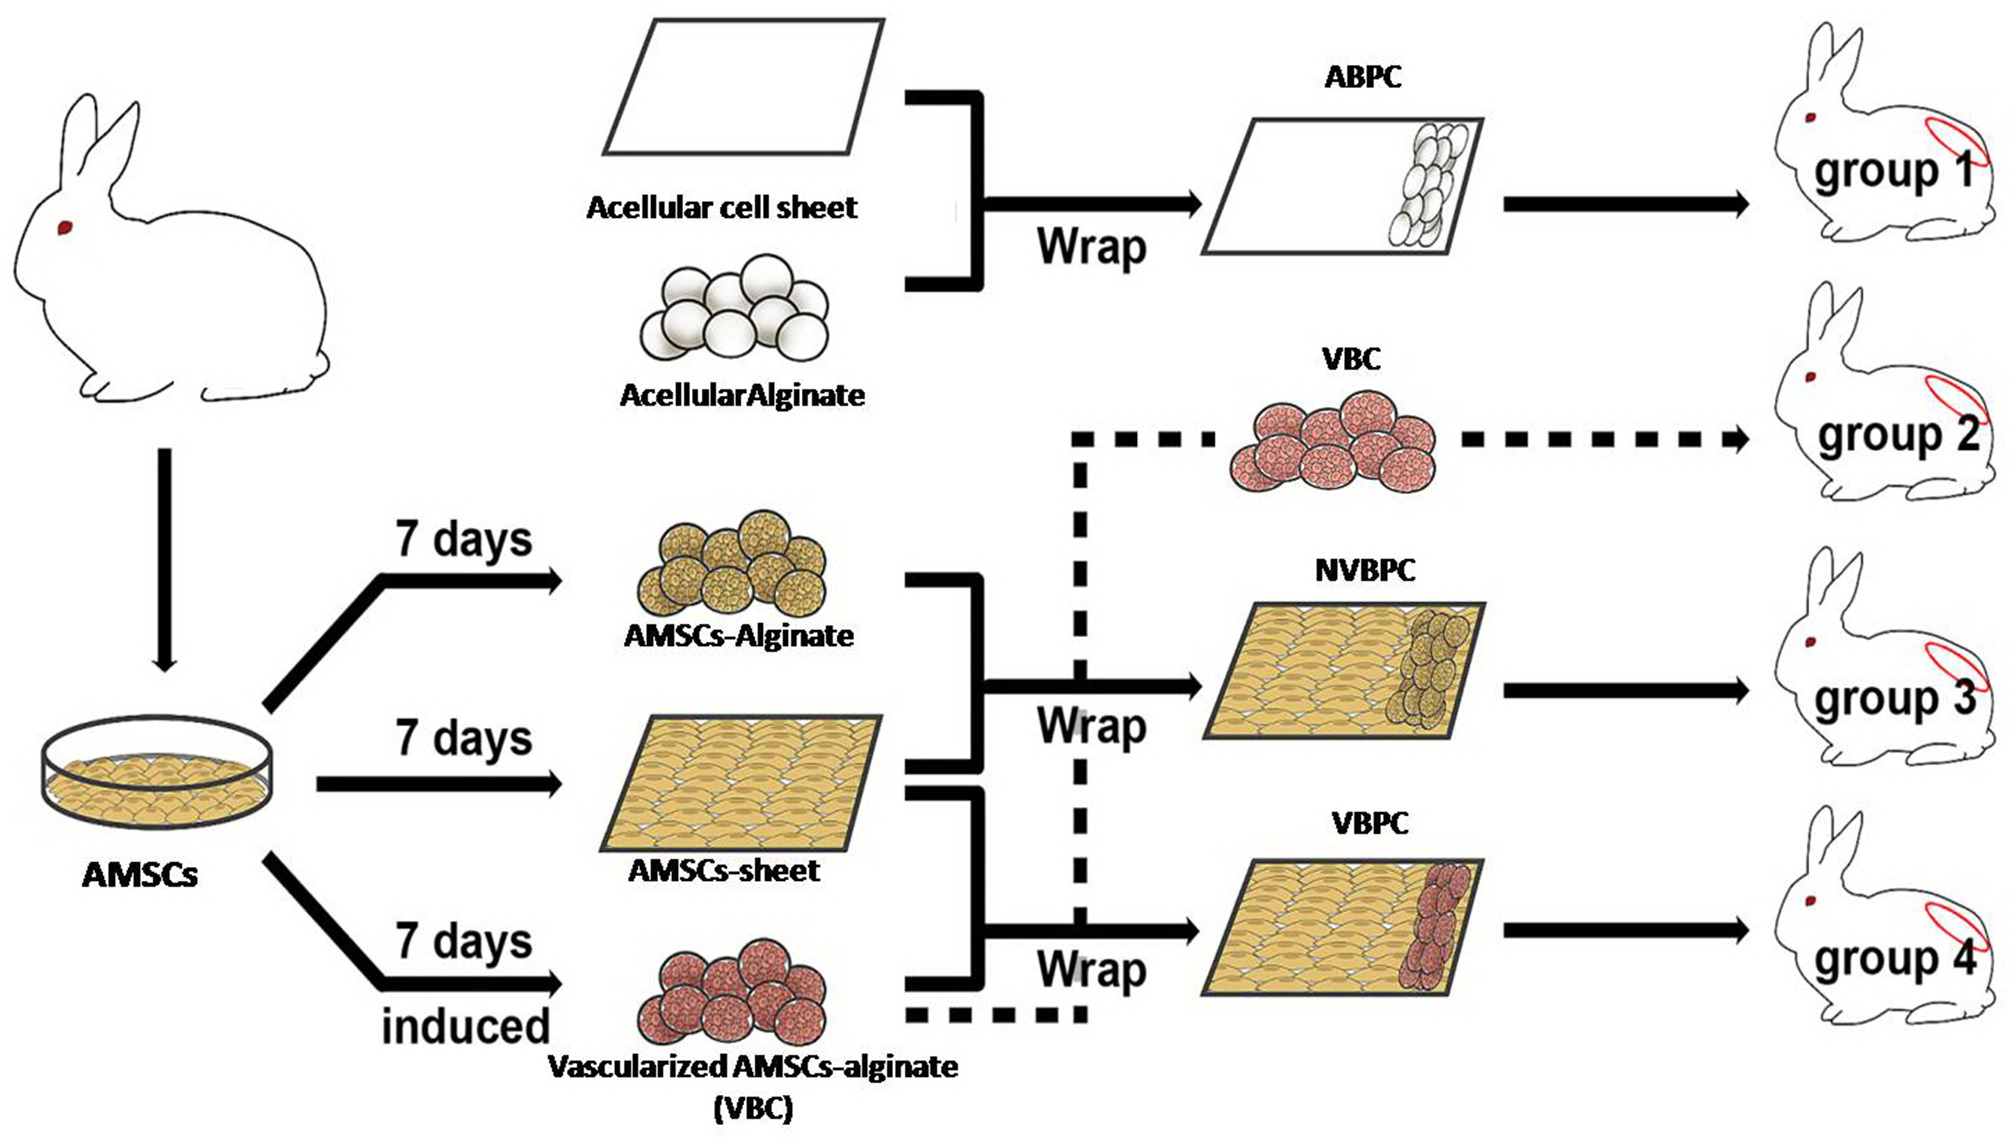 Fig. 1 
            Schematic diagram of the experimental designs and bone graft materials of a rabbit posterolateral spinal fusion model. ABPC, acellular bone construct wrapped with cell sheet (n = 6) as a control group; AMSCs, adipose-derived mesenchymal stem cells; NVBPC, non-vascularized bone-periosteum construct; VBC, vascularized bone construct; VBPC, vascularized bone-periosteum construct.
          